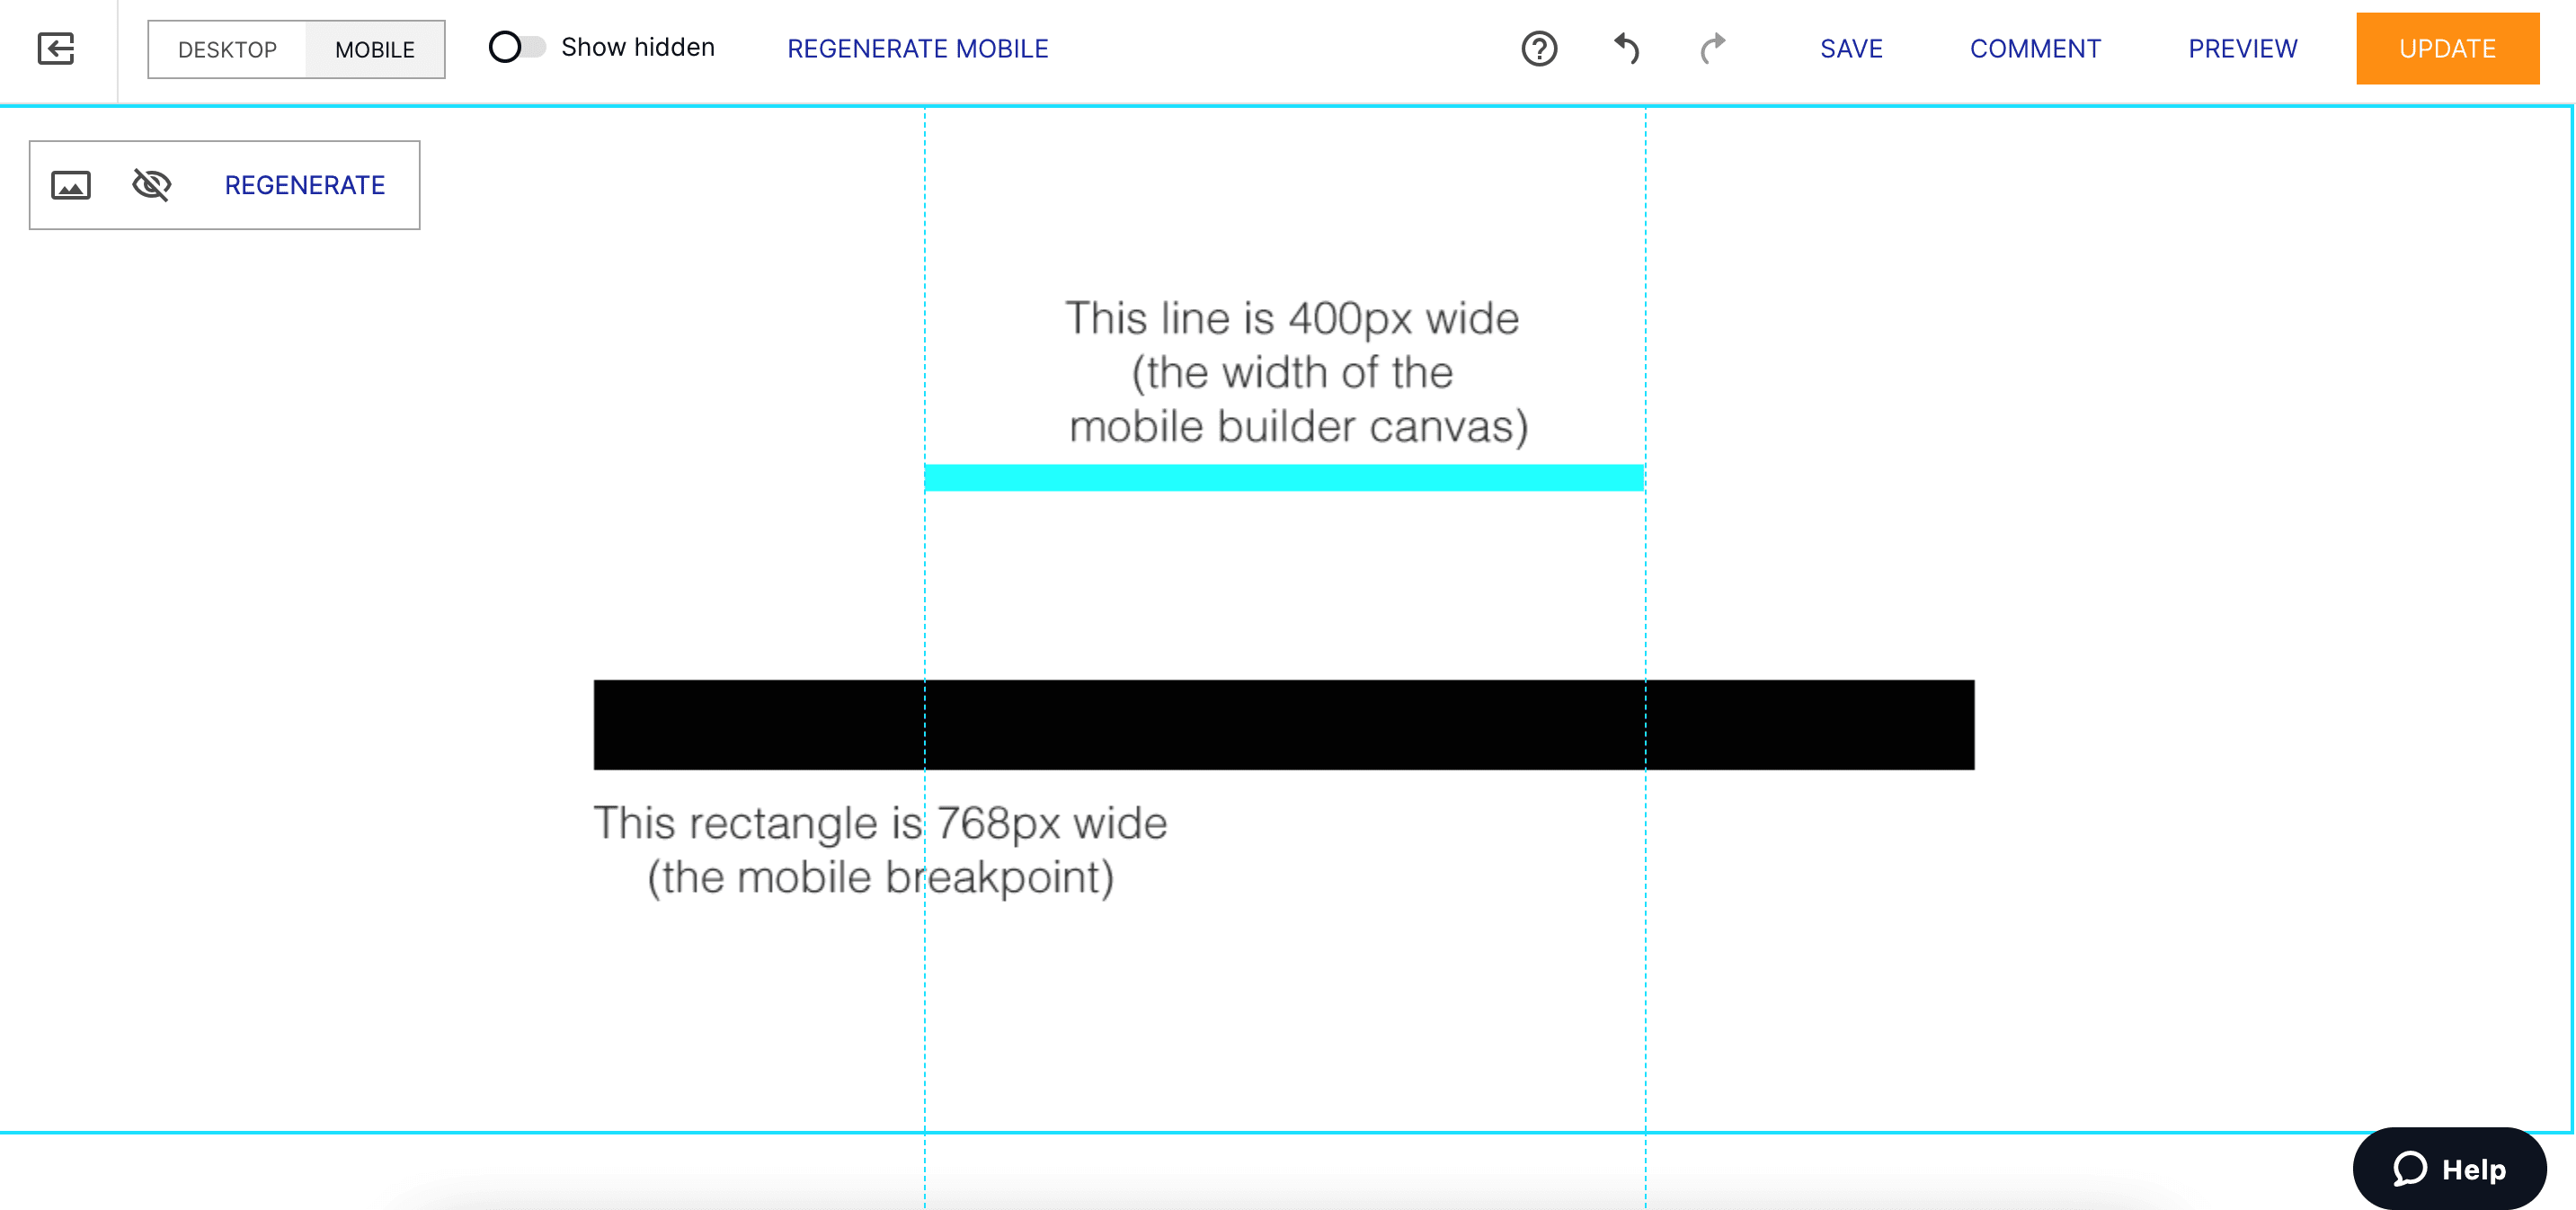 A screenshot of the mobile builder with a background image that shows a visual representation of how much 400px and 768px are